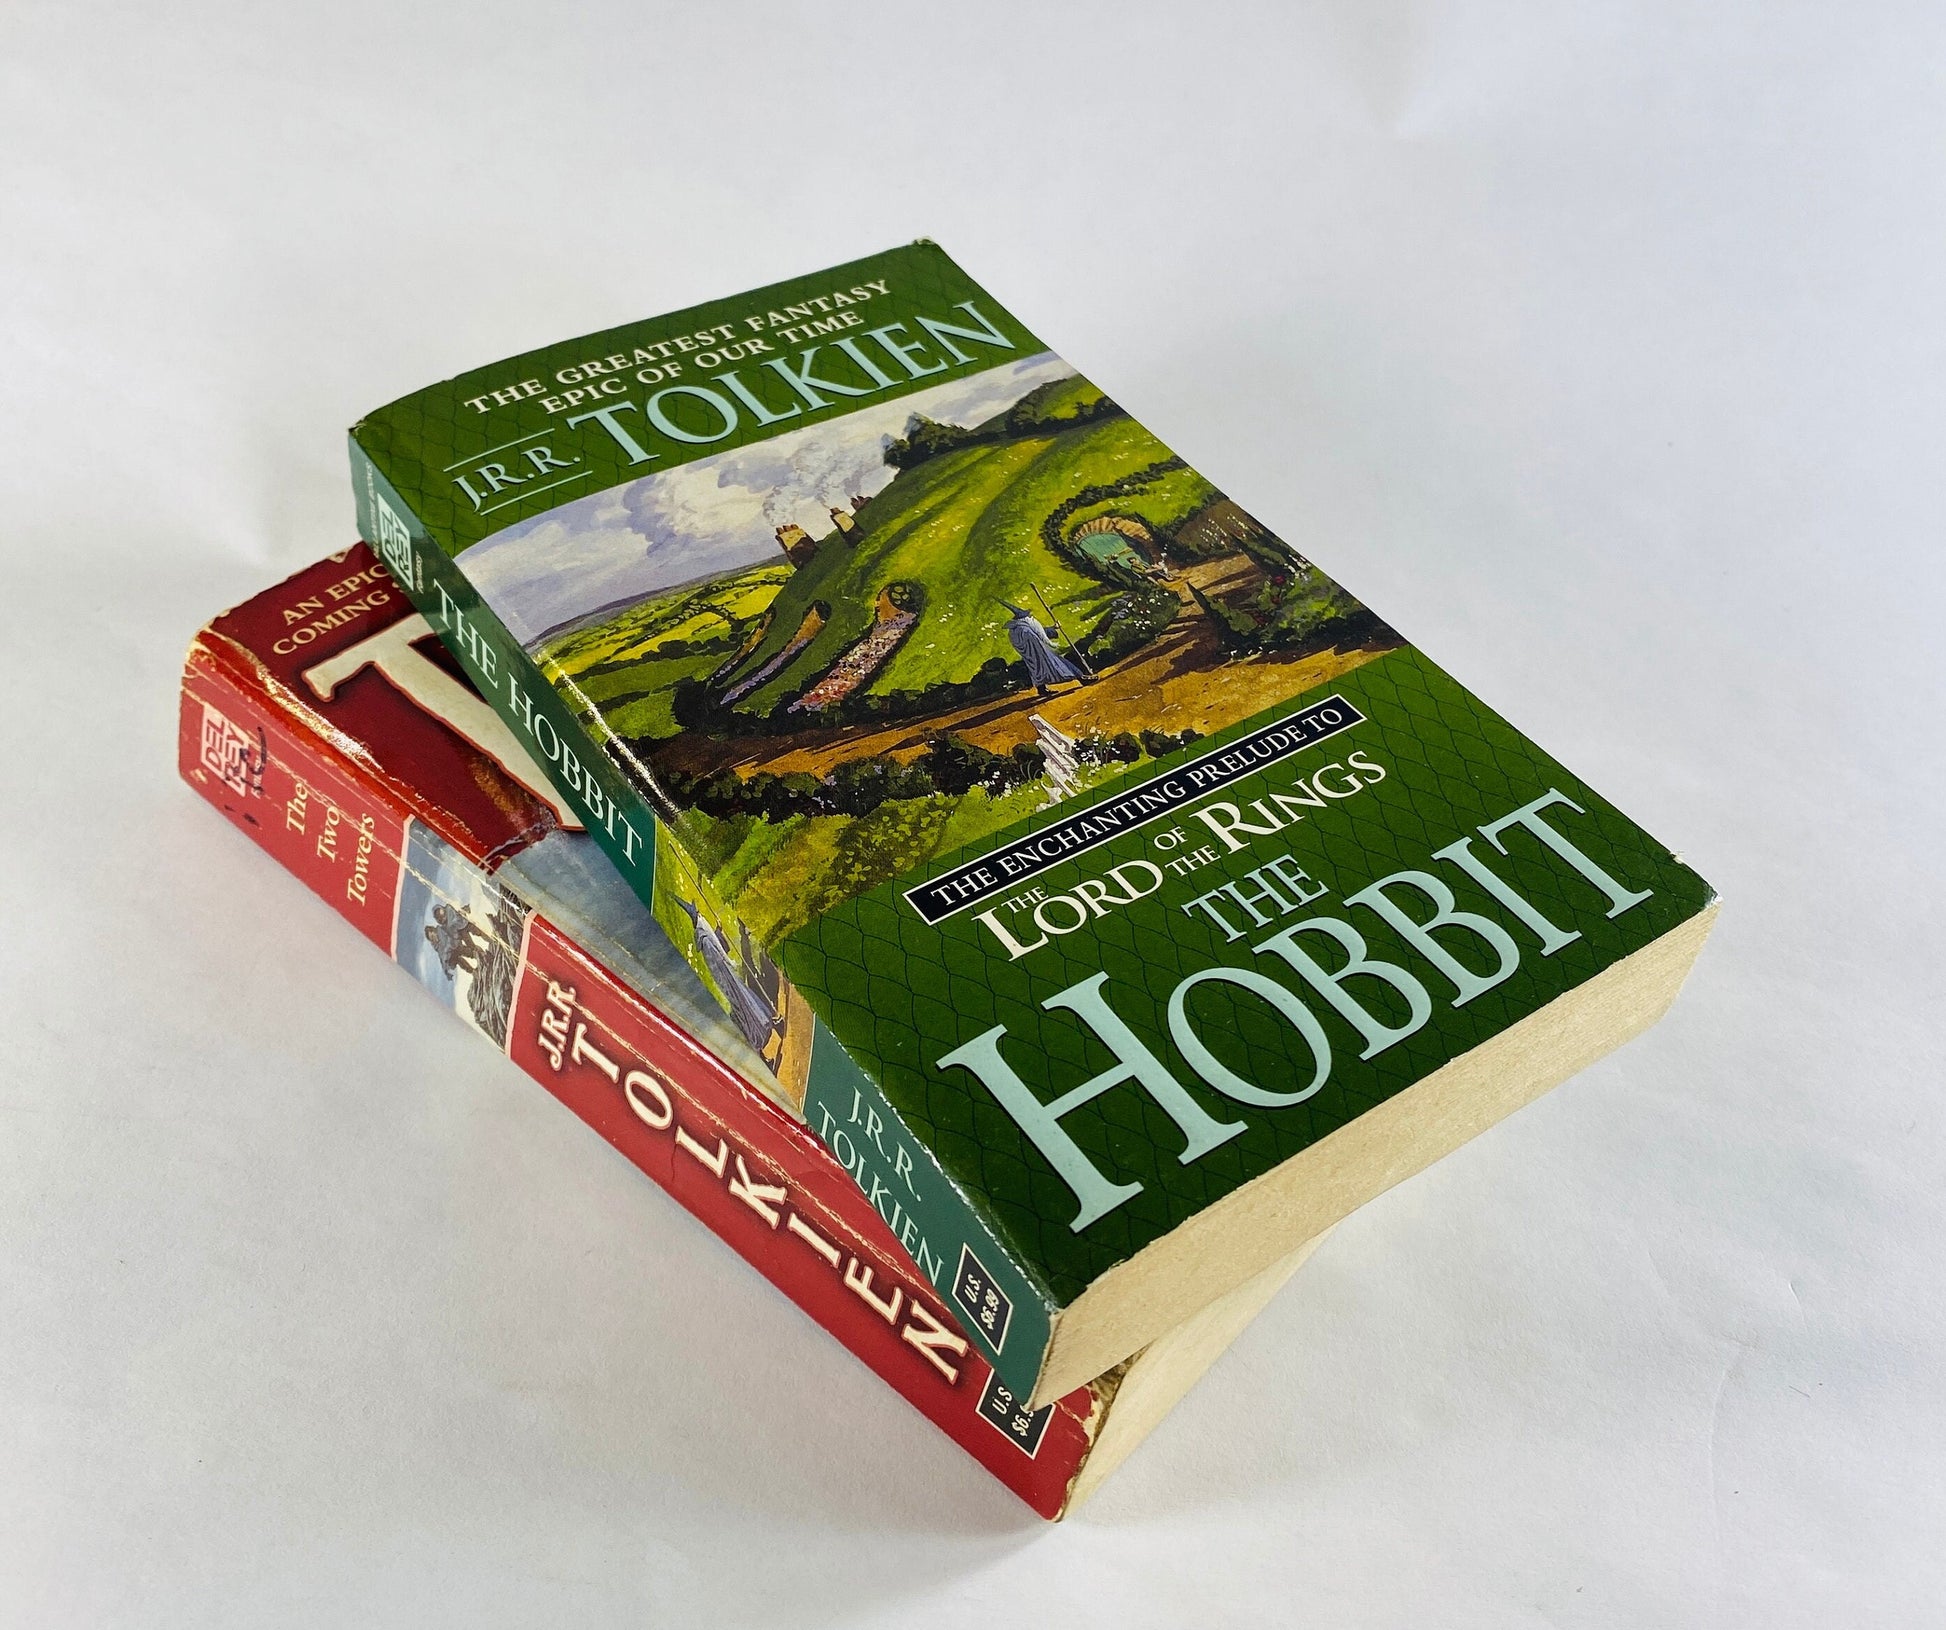 JRR Tolkien vintage paperback books Hobbit, Fellowship of Ring Two Towers. Lord of the Rings series circa 1994